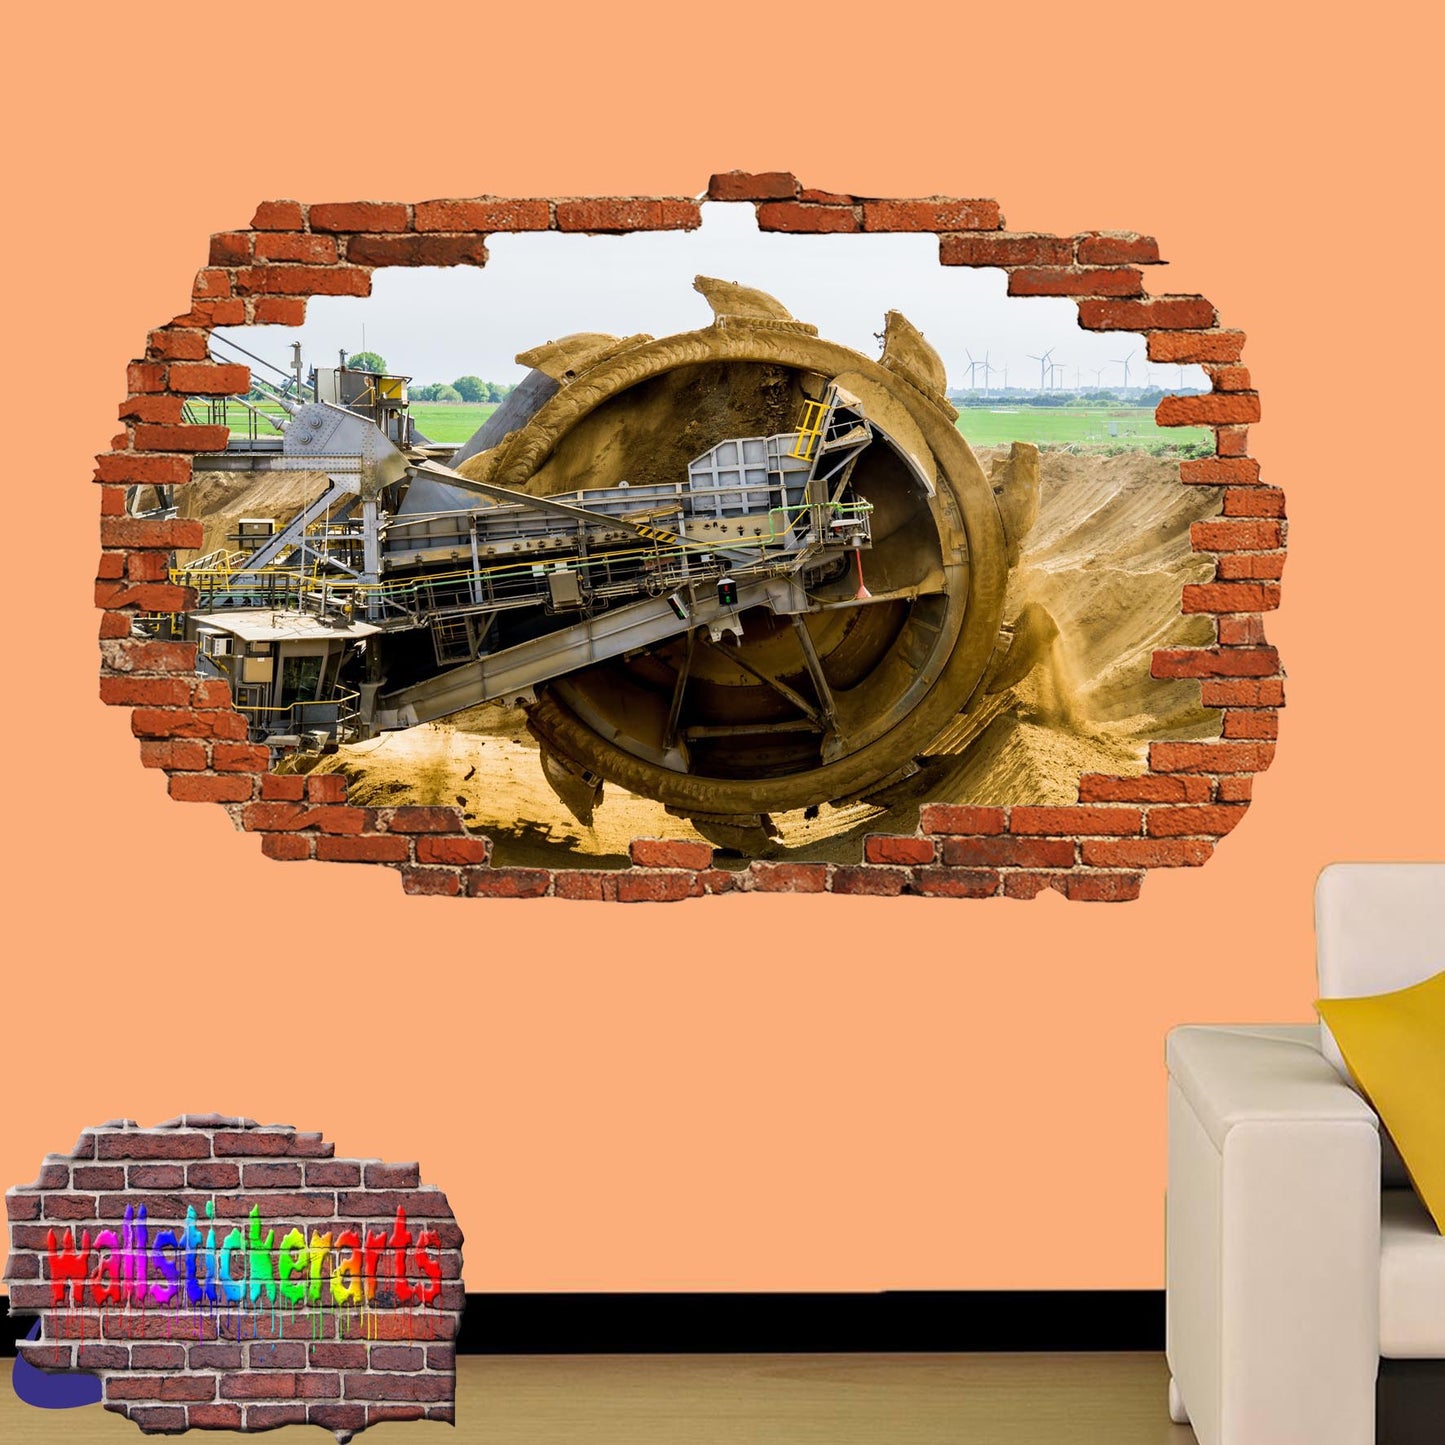 Monster Excavator Working on Mine 3d Art Smashed Effect Wall Sticker Room Office Nursery Shop Decoration Decal Mural YK3